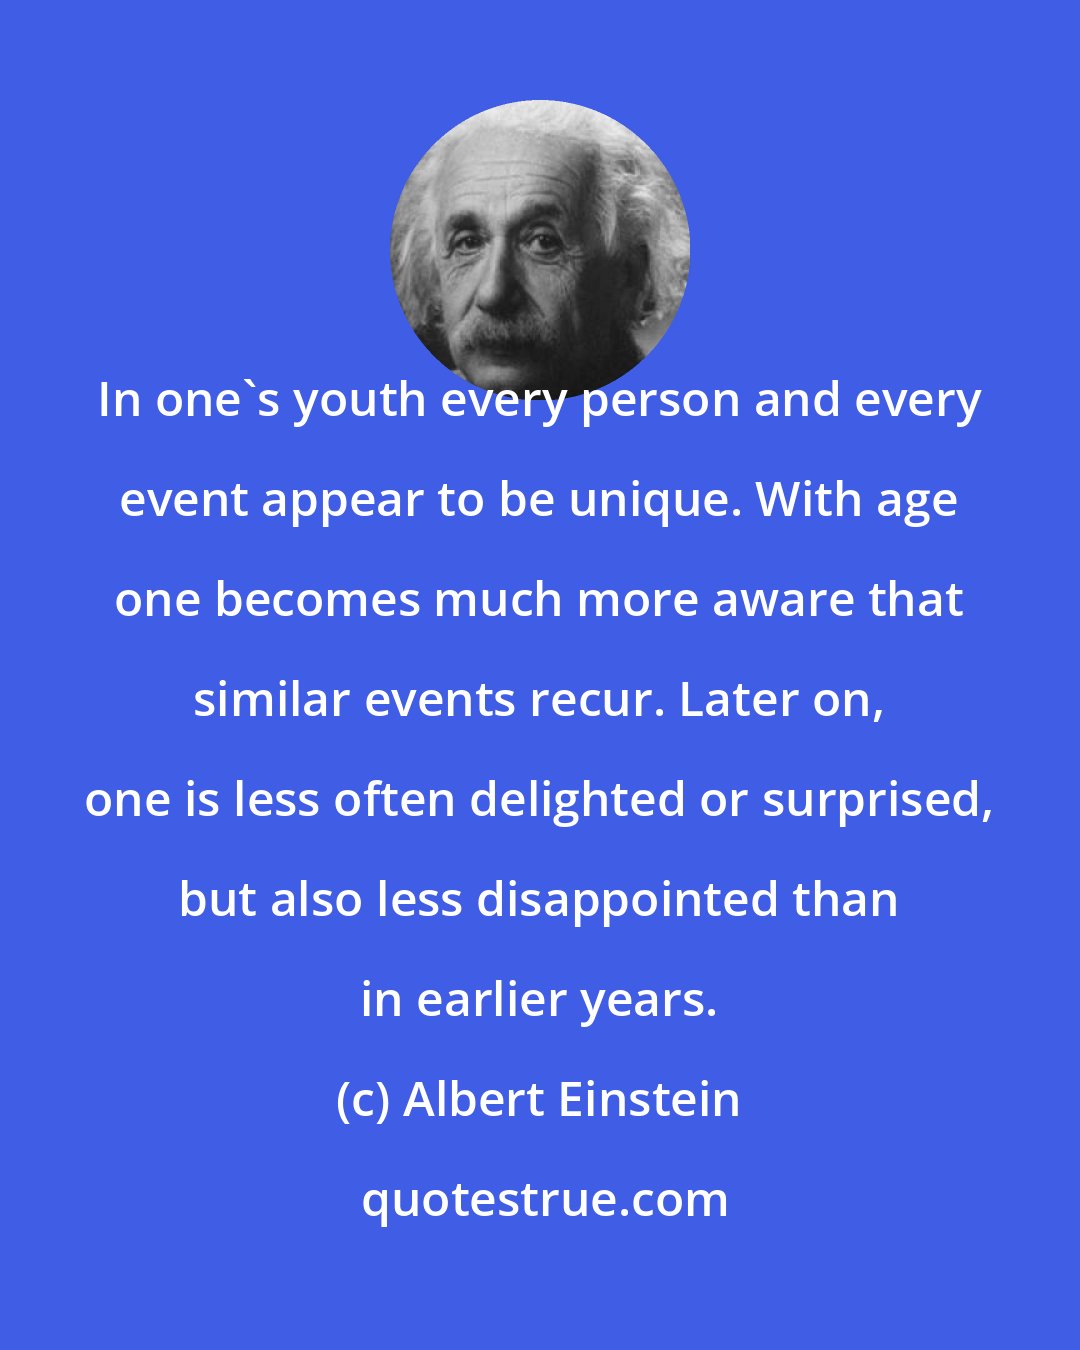 Albert Einstein: In one's youth every person and every event appear to be unique. With age one becomes much more aware that similar events recur. Later on, one is less often delighted or surprised, but also less disappointed than in earlier years.